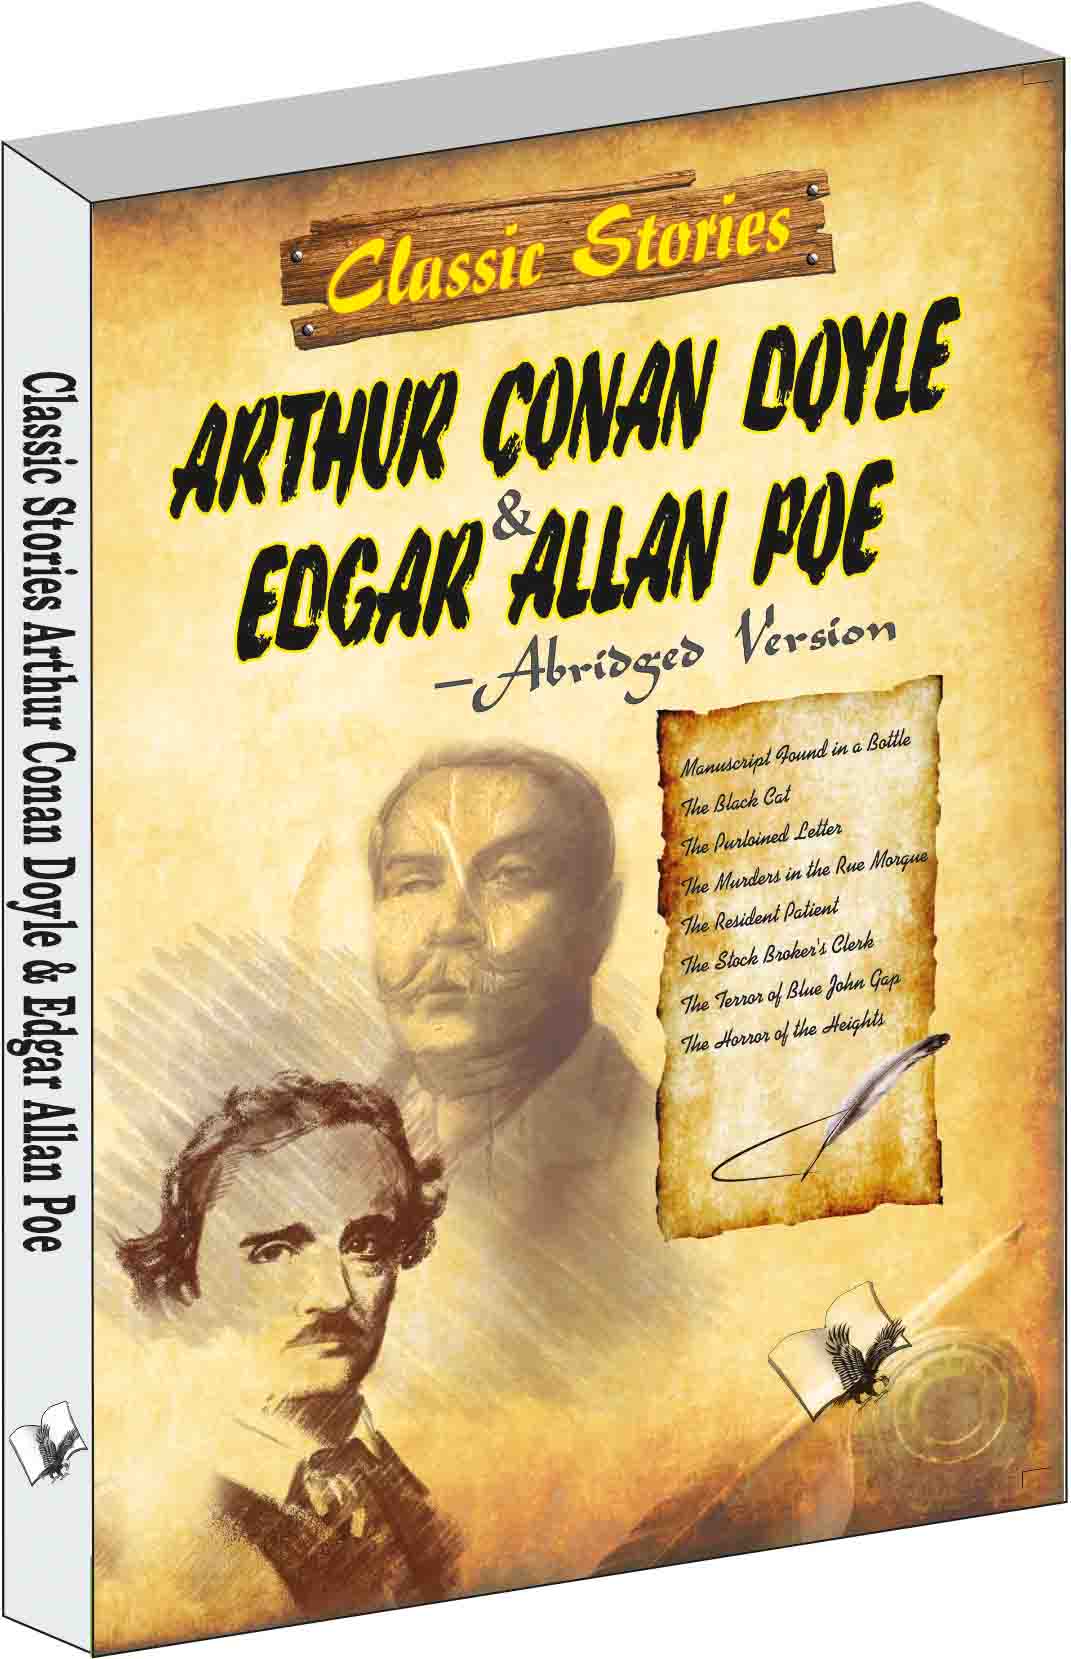 Classic Stories of Arthur Conan Coyle Edgar & Allan poe-8 fast-paced stories of thrill and excitement